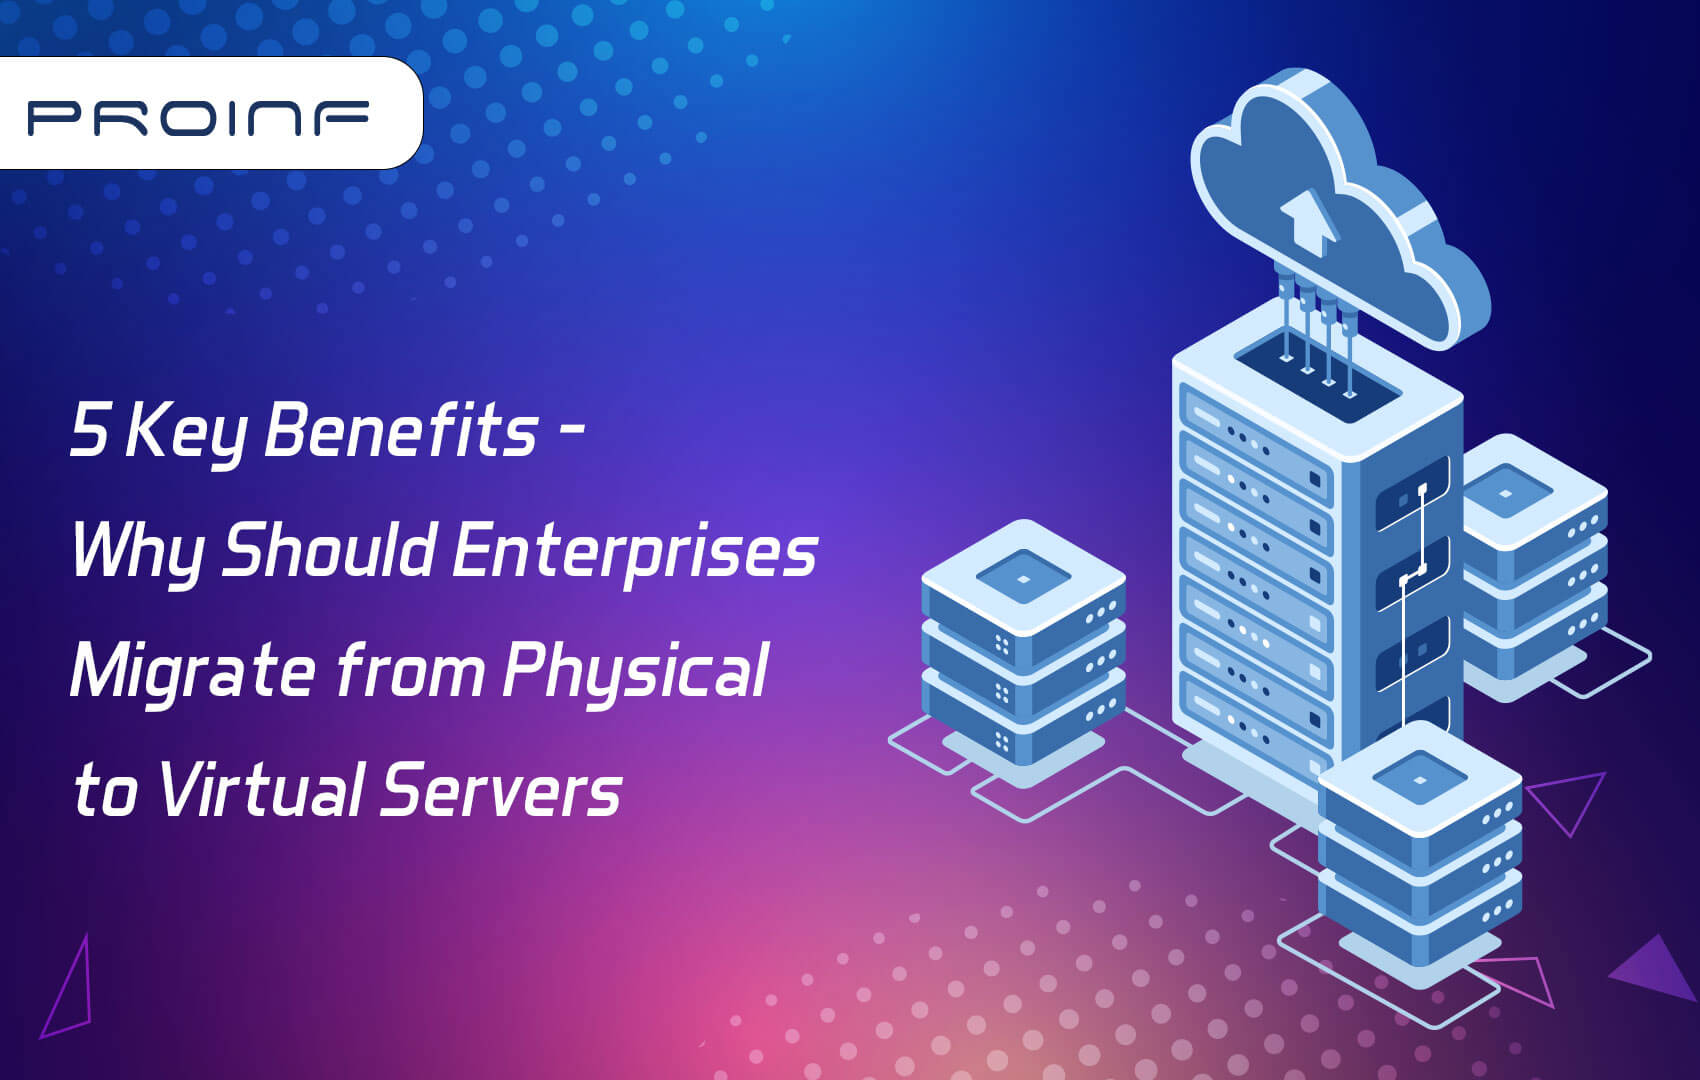 5 Key Benefits - Why Should Enterprises Migrate From Physical To Virtual Servers